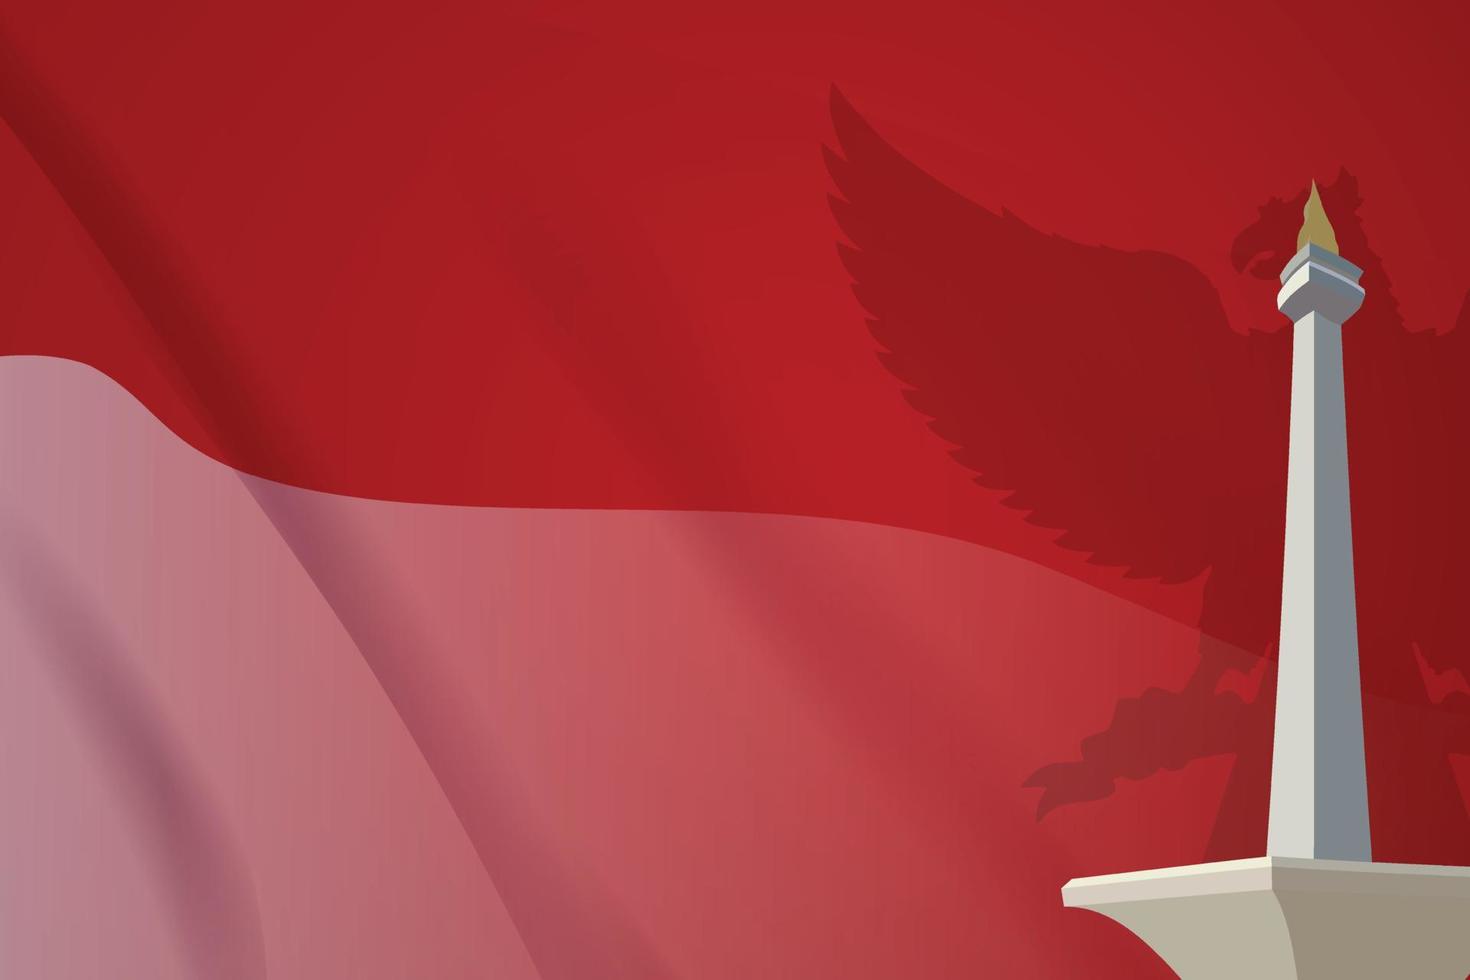 Indonesian Red and White flag fluttering background style with ornament realistic Monas Landmark 3D and Garuda bird vector